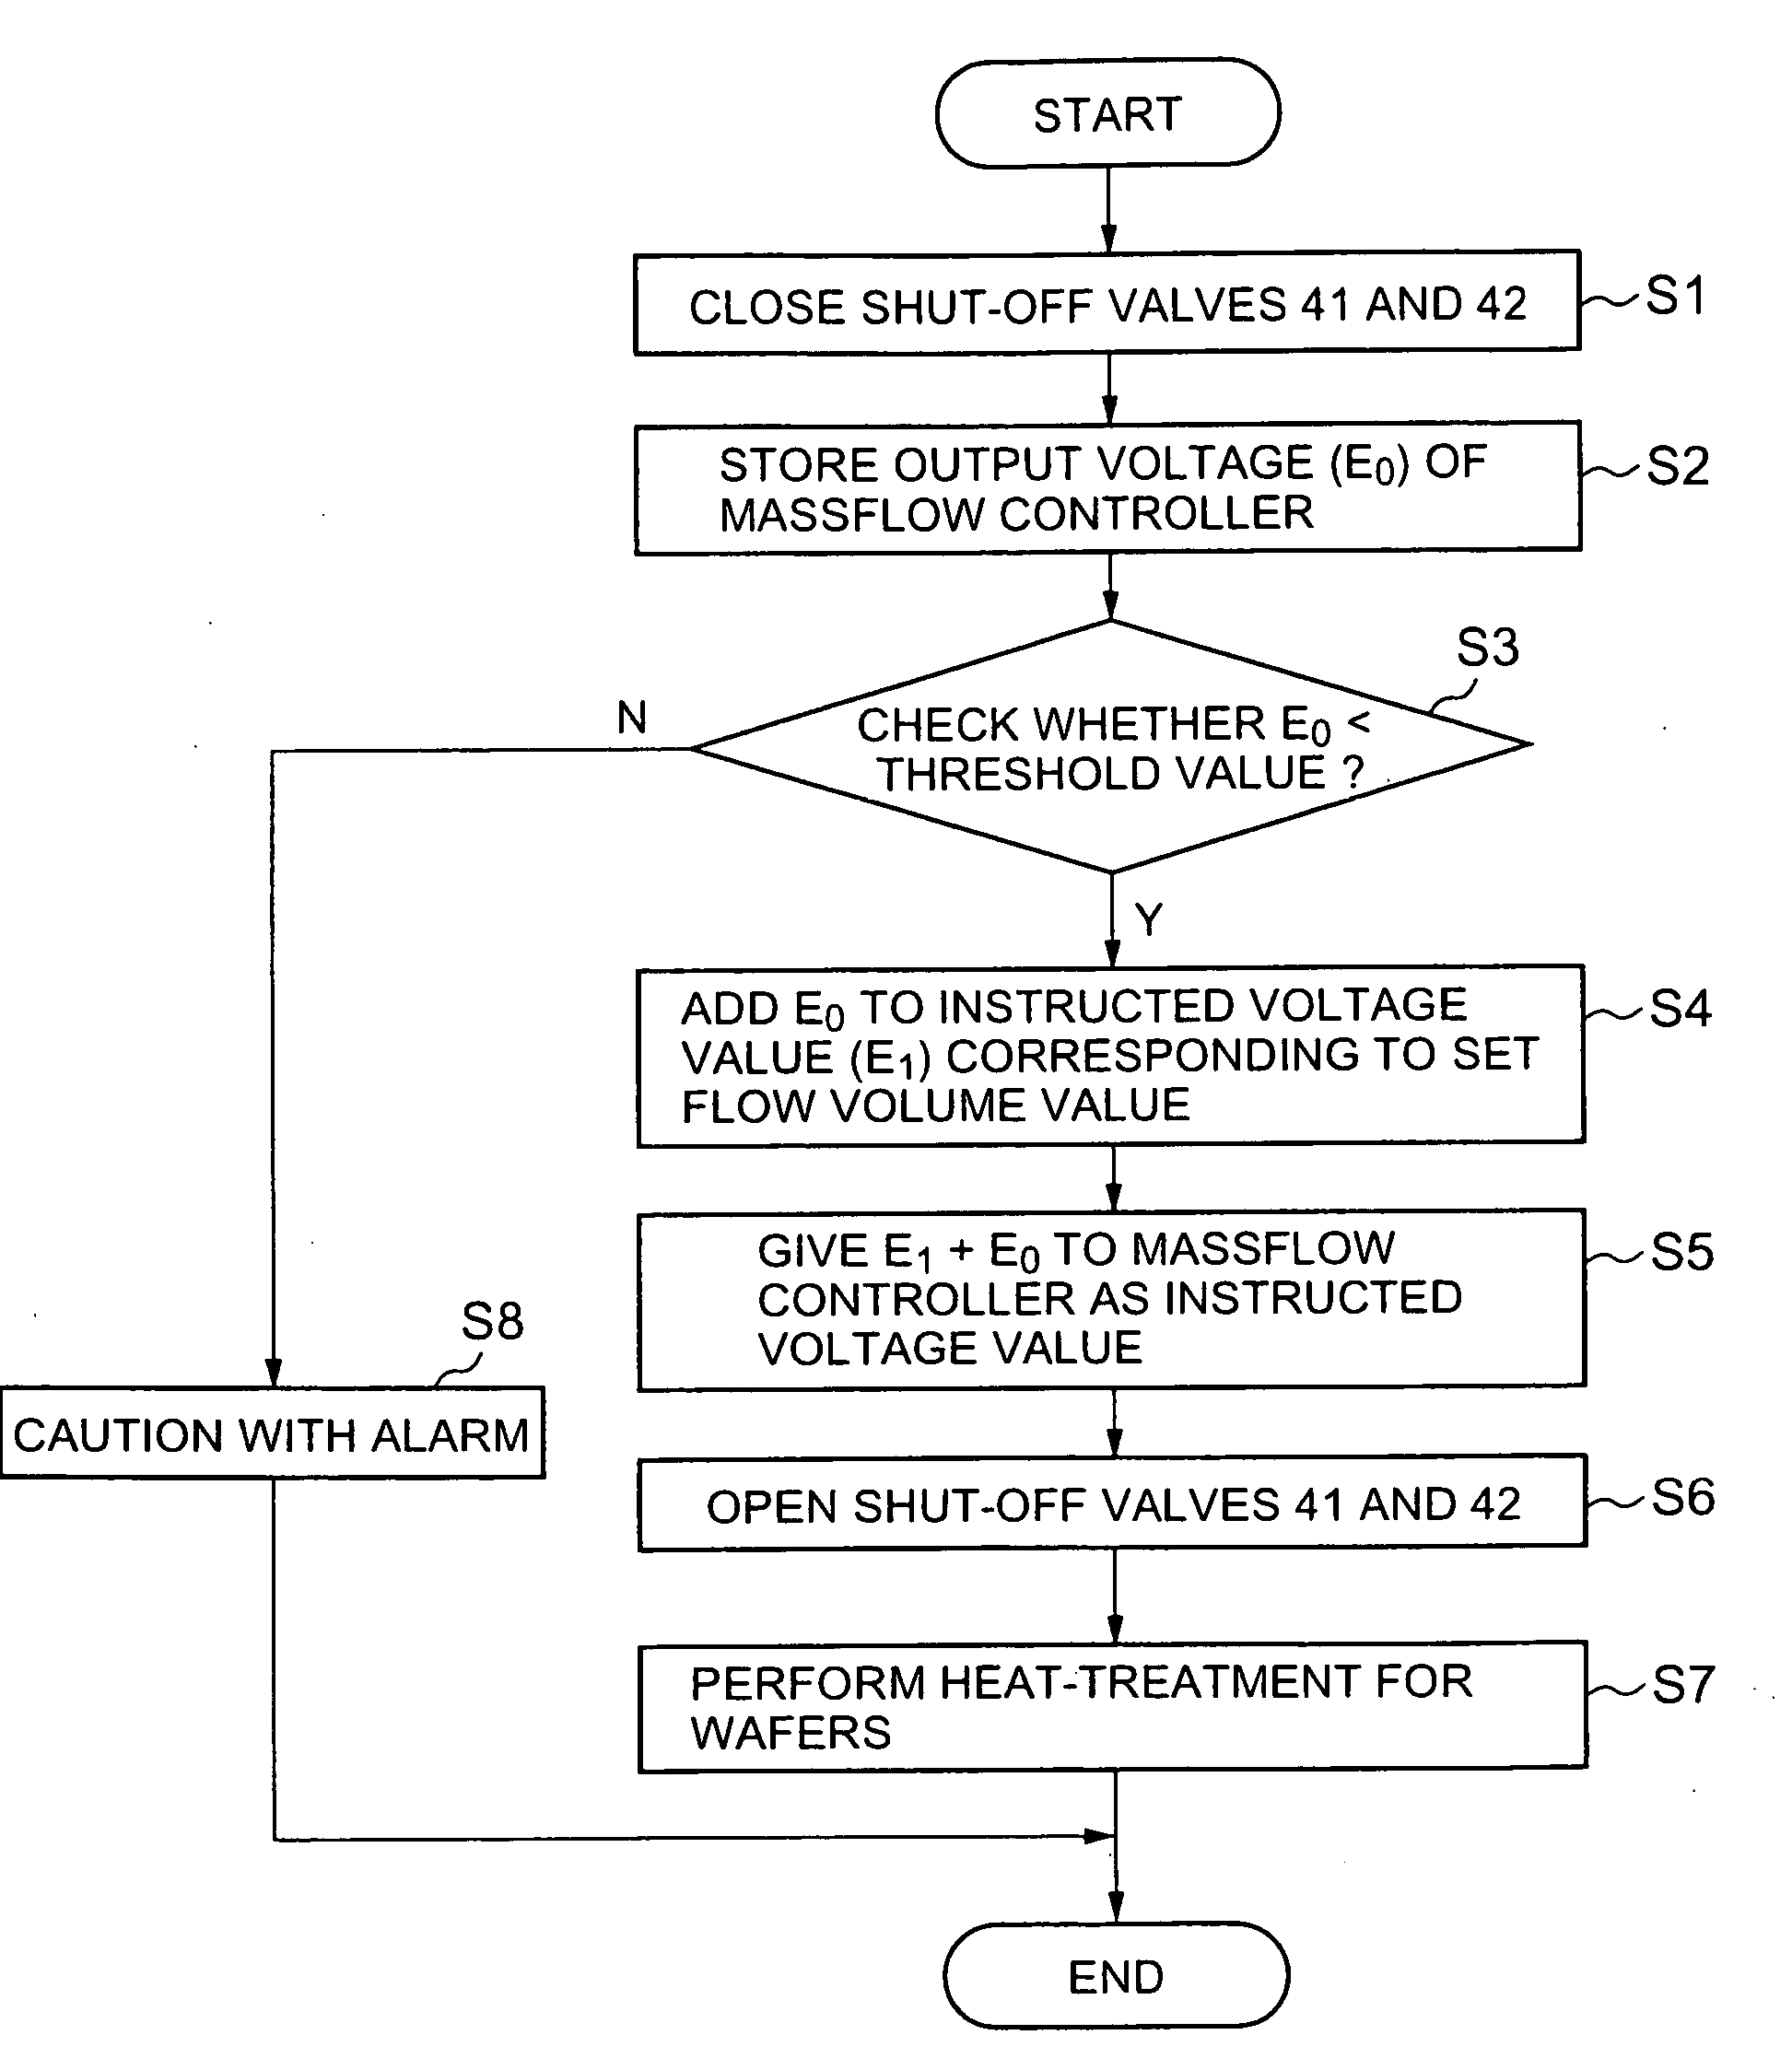 Semiconductor production system and semiconductor production process